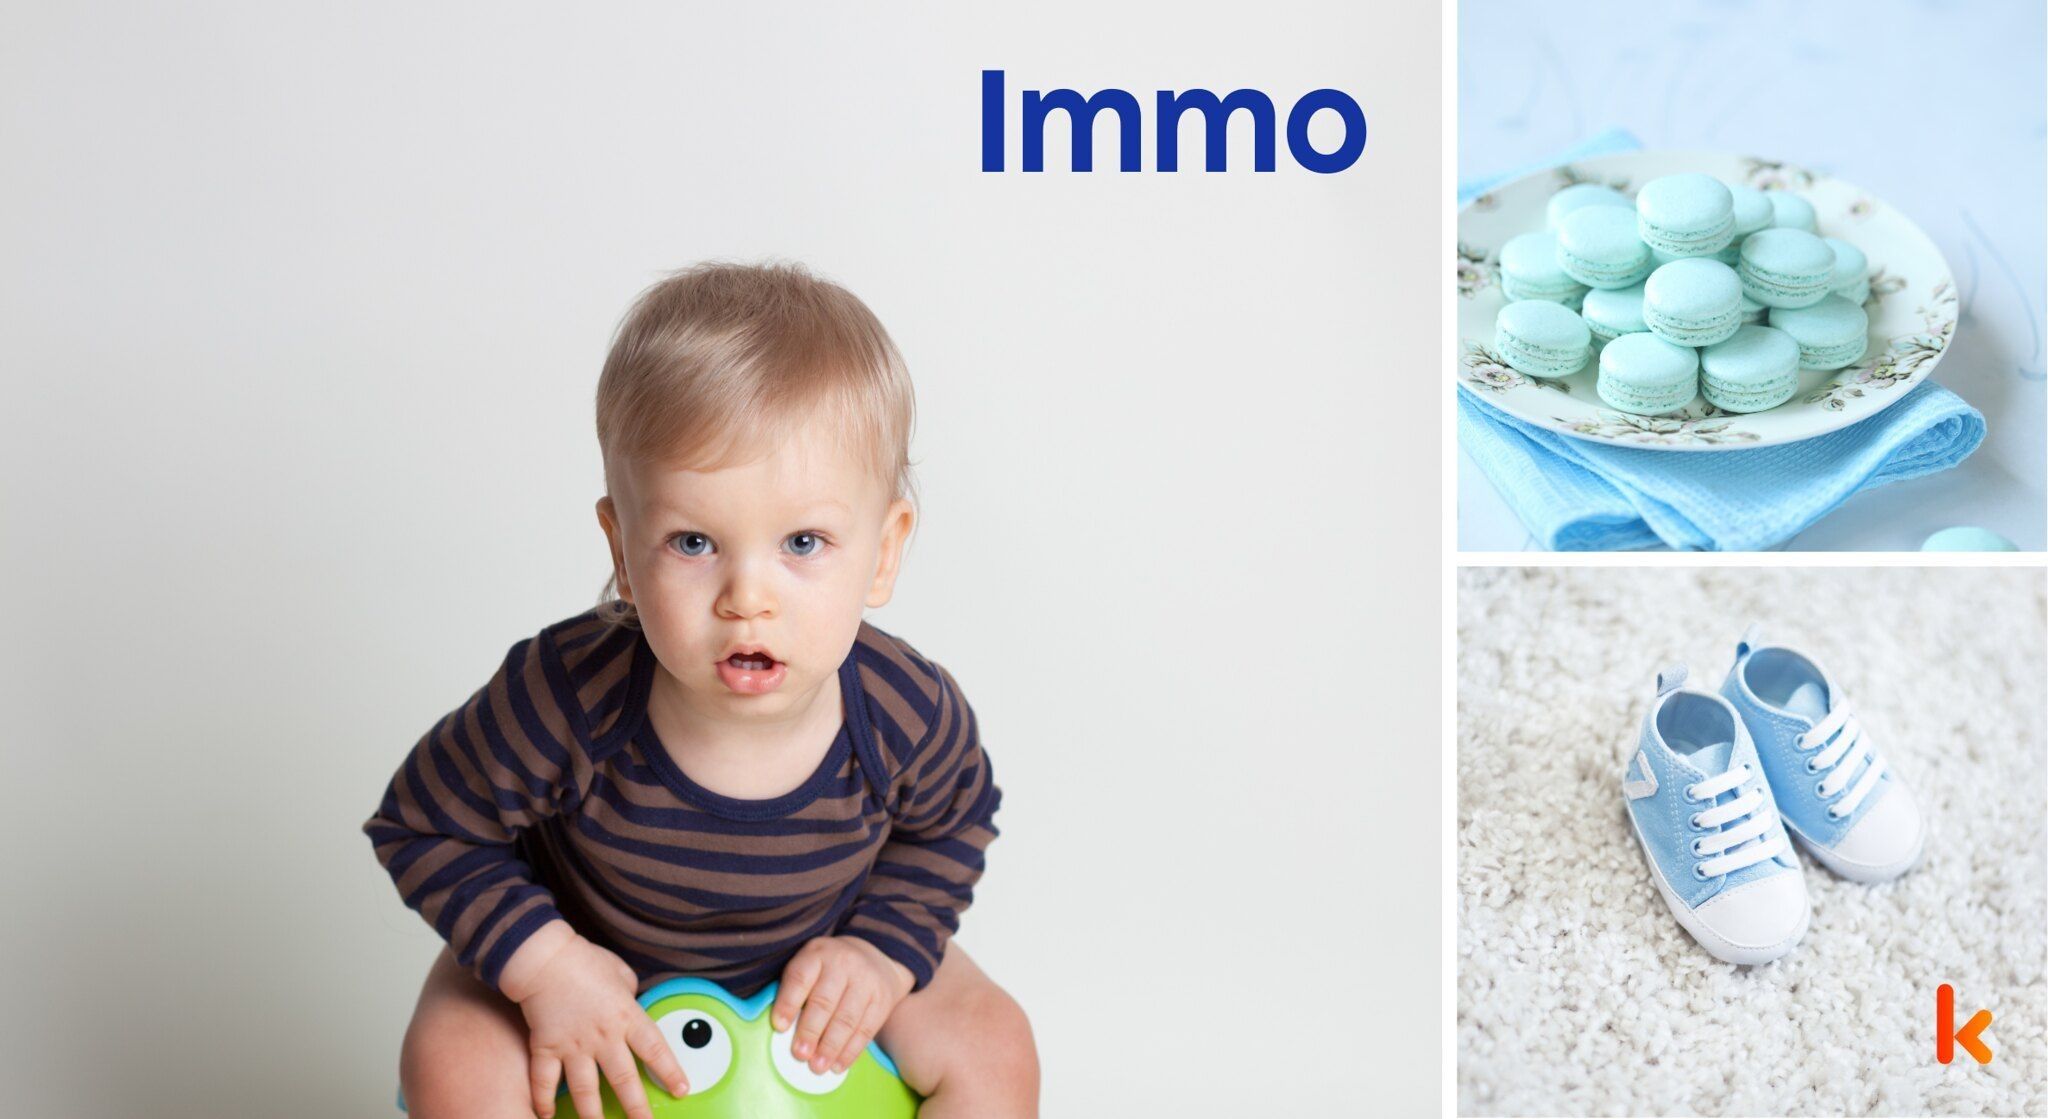 Meaning of the name Immo